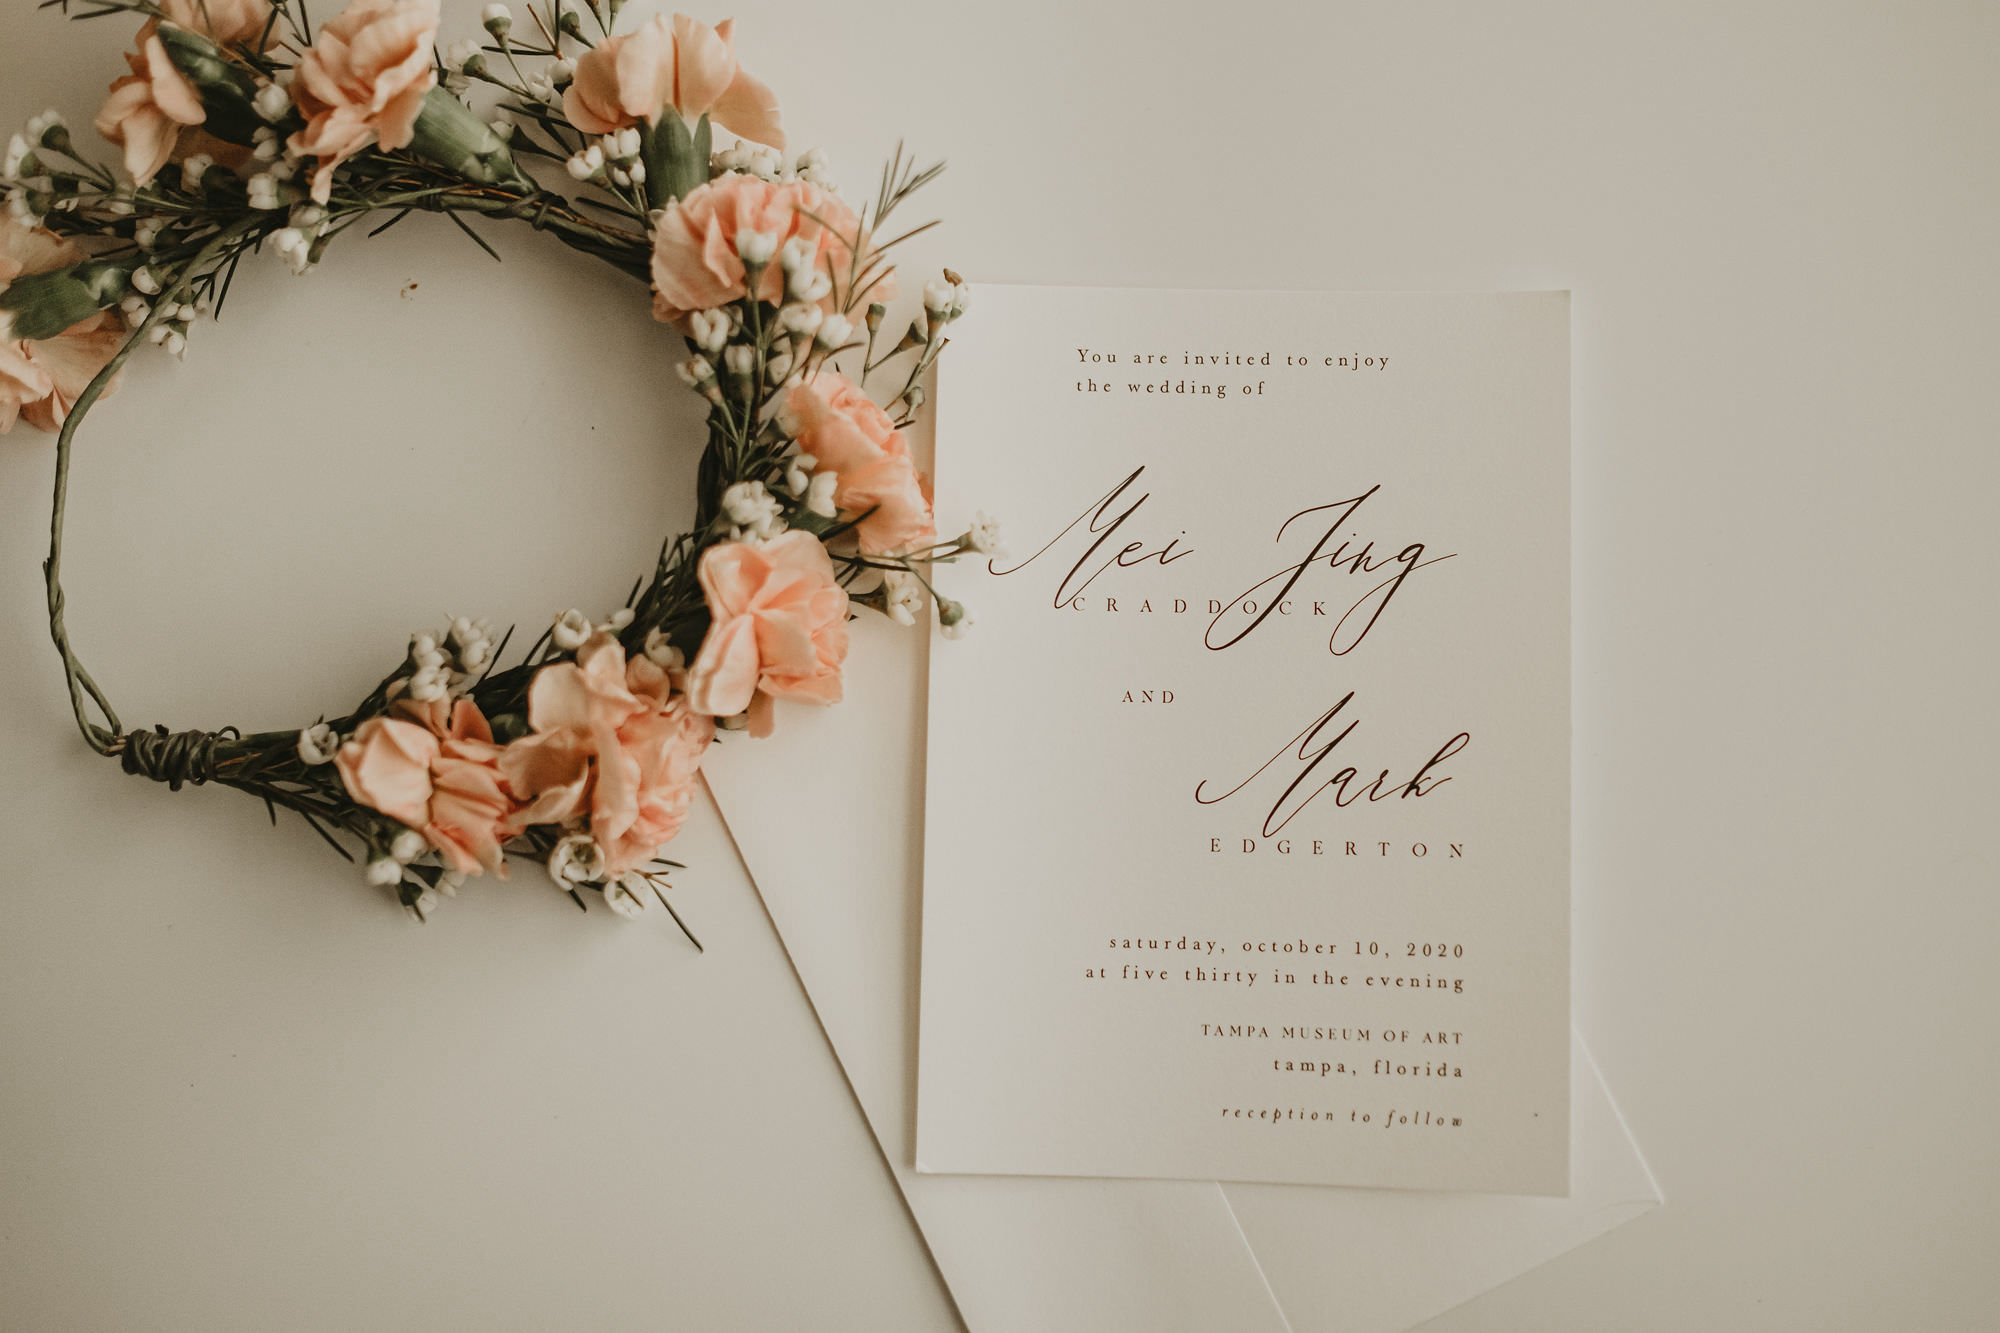 Minimalist Wedding Invitation with Calligraphy and Peach Pink Carnation Flower Crown Halo